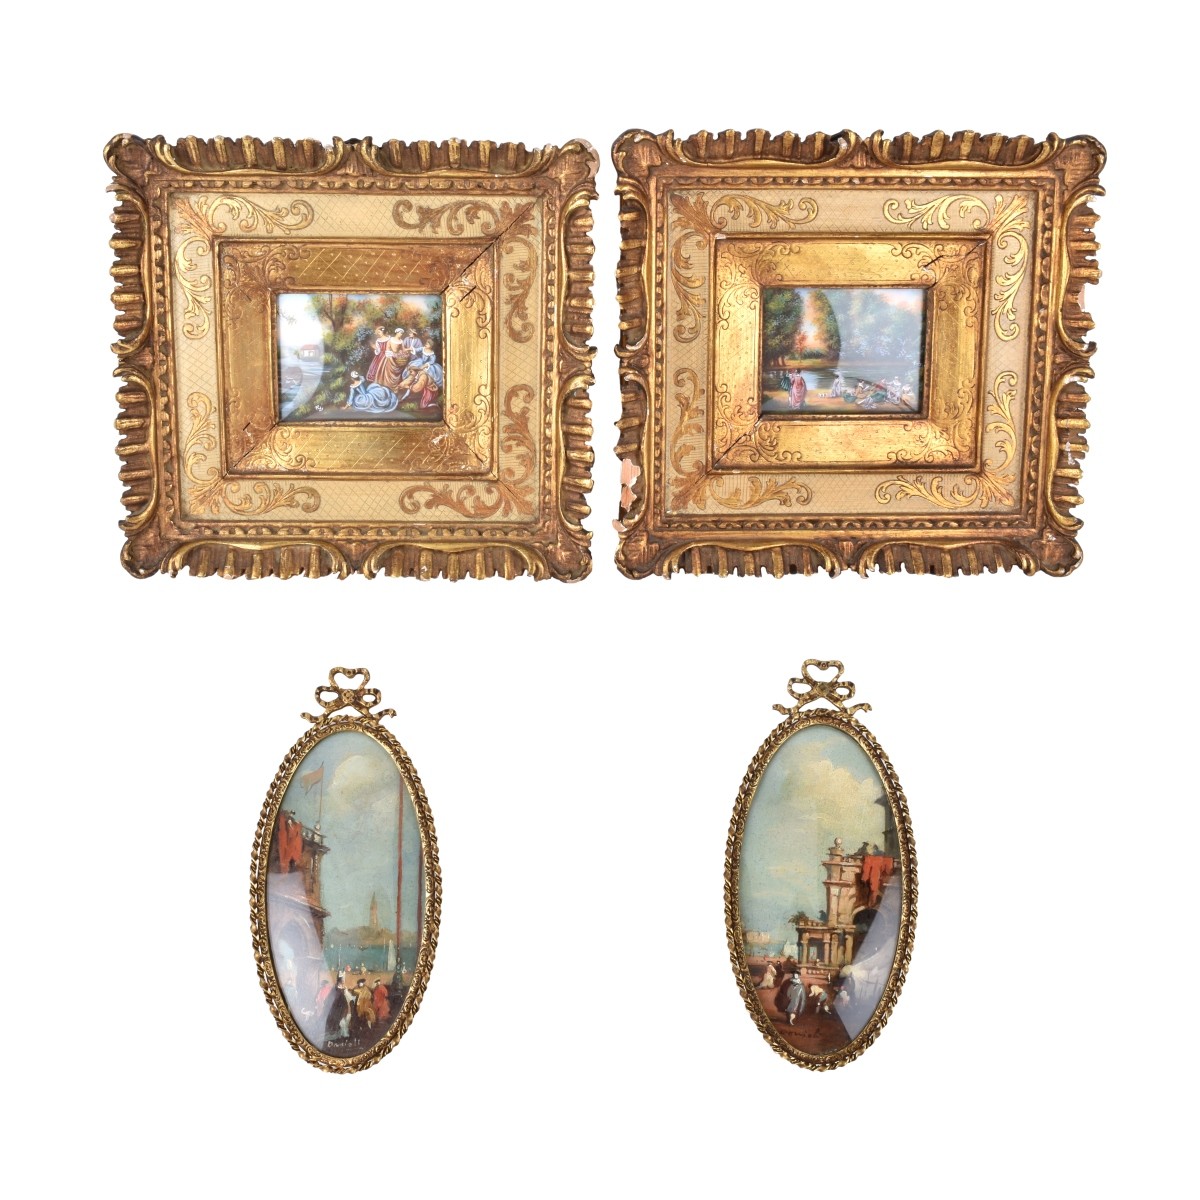 Four (4) Continental Miniature Paintings